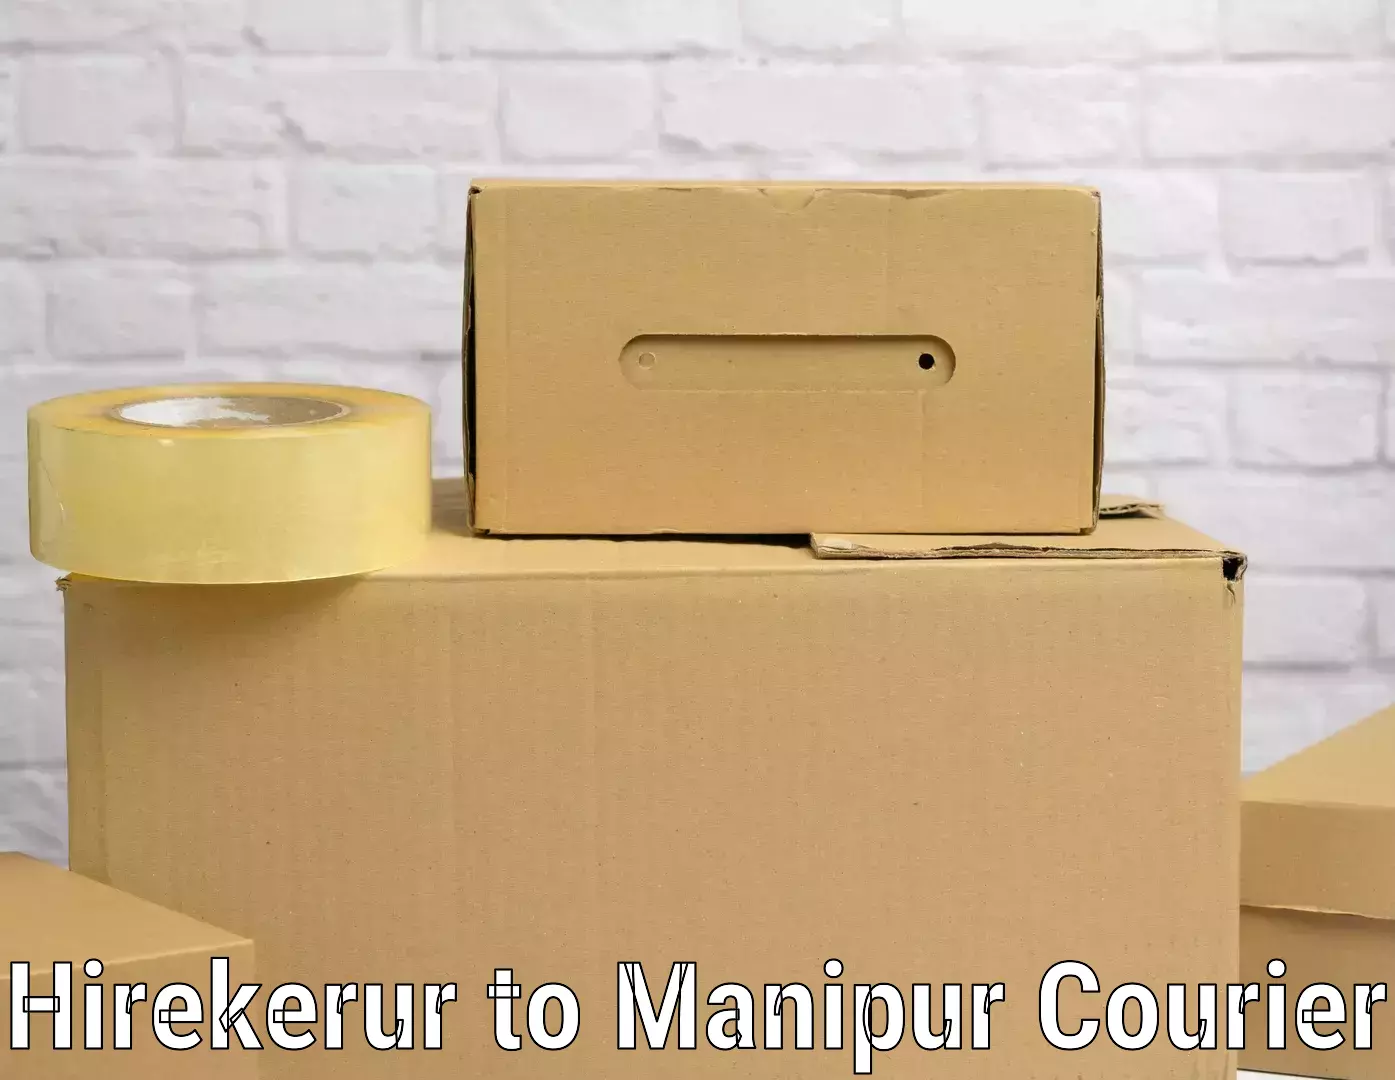 Luggage delivery estimate Hirekerur to Manipur